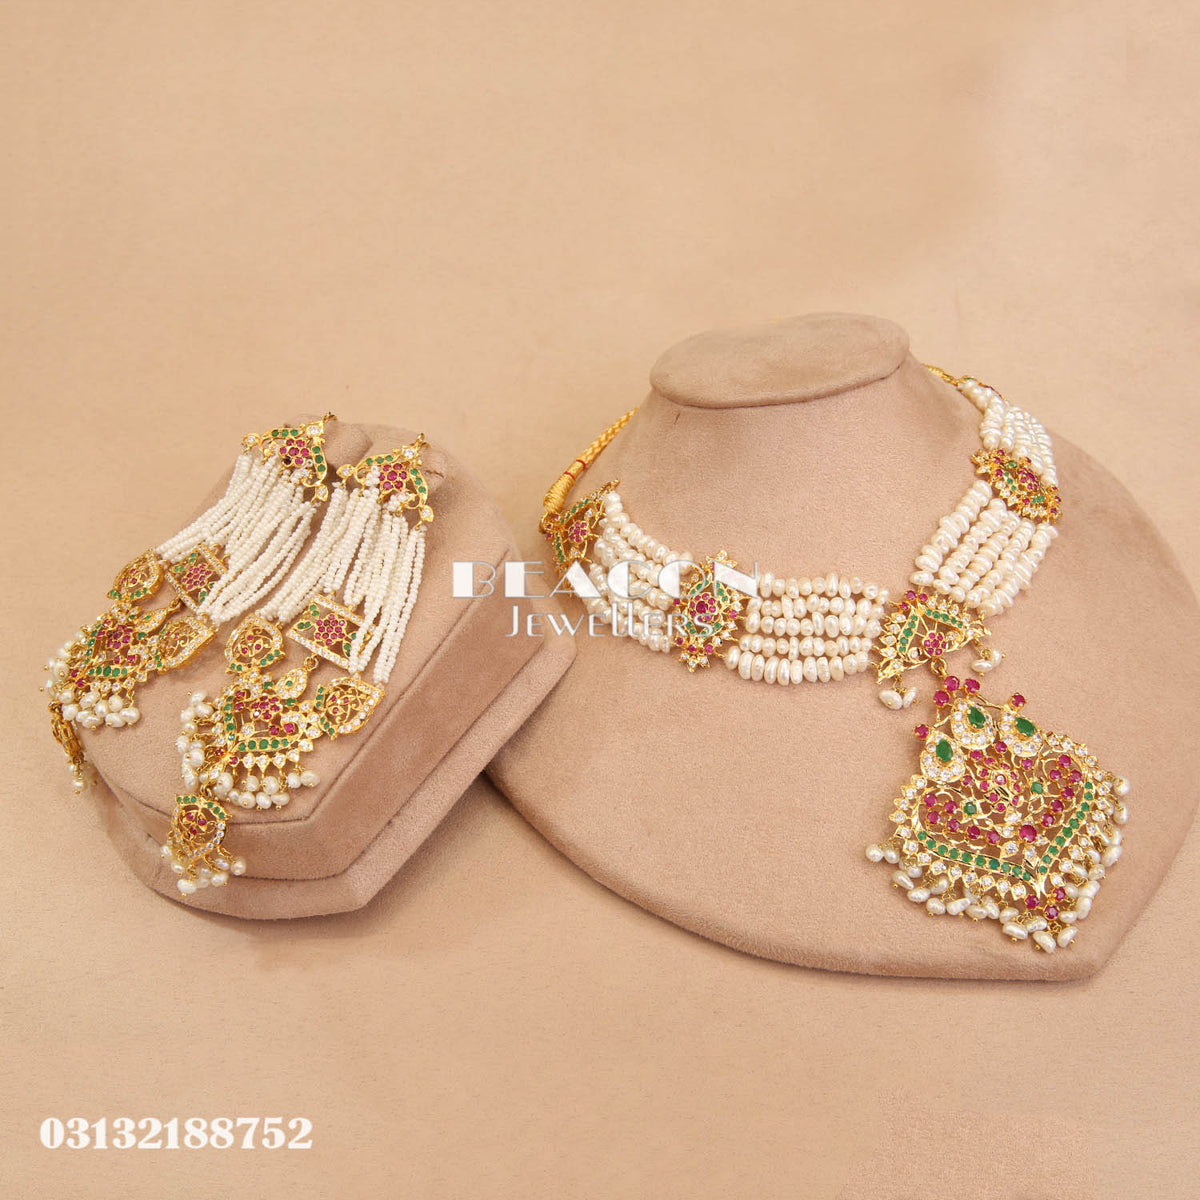 Necklace and Earrings 121